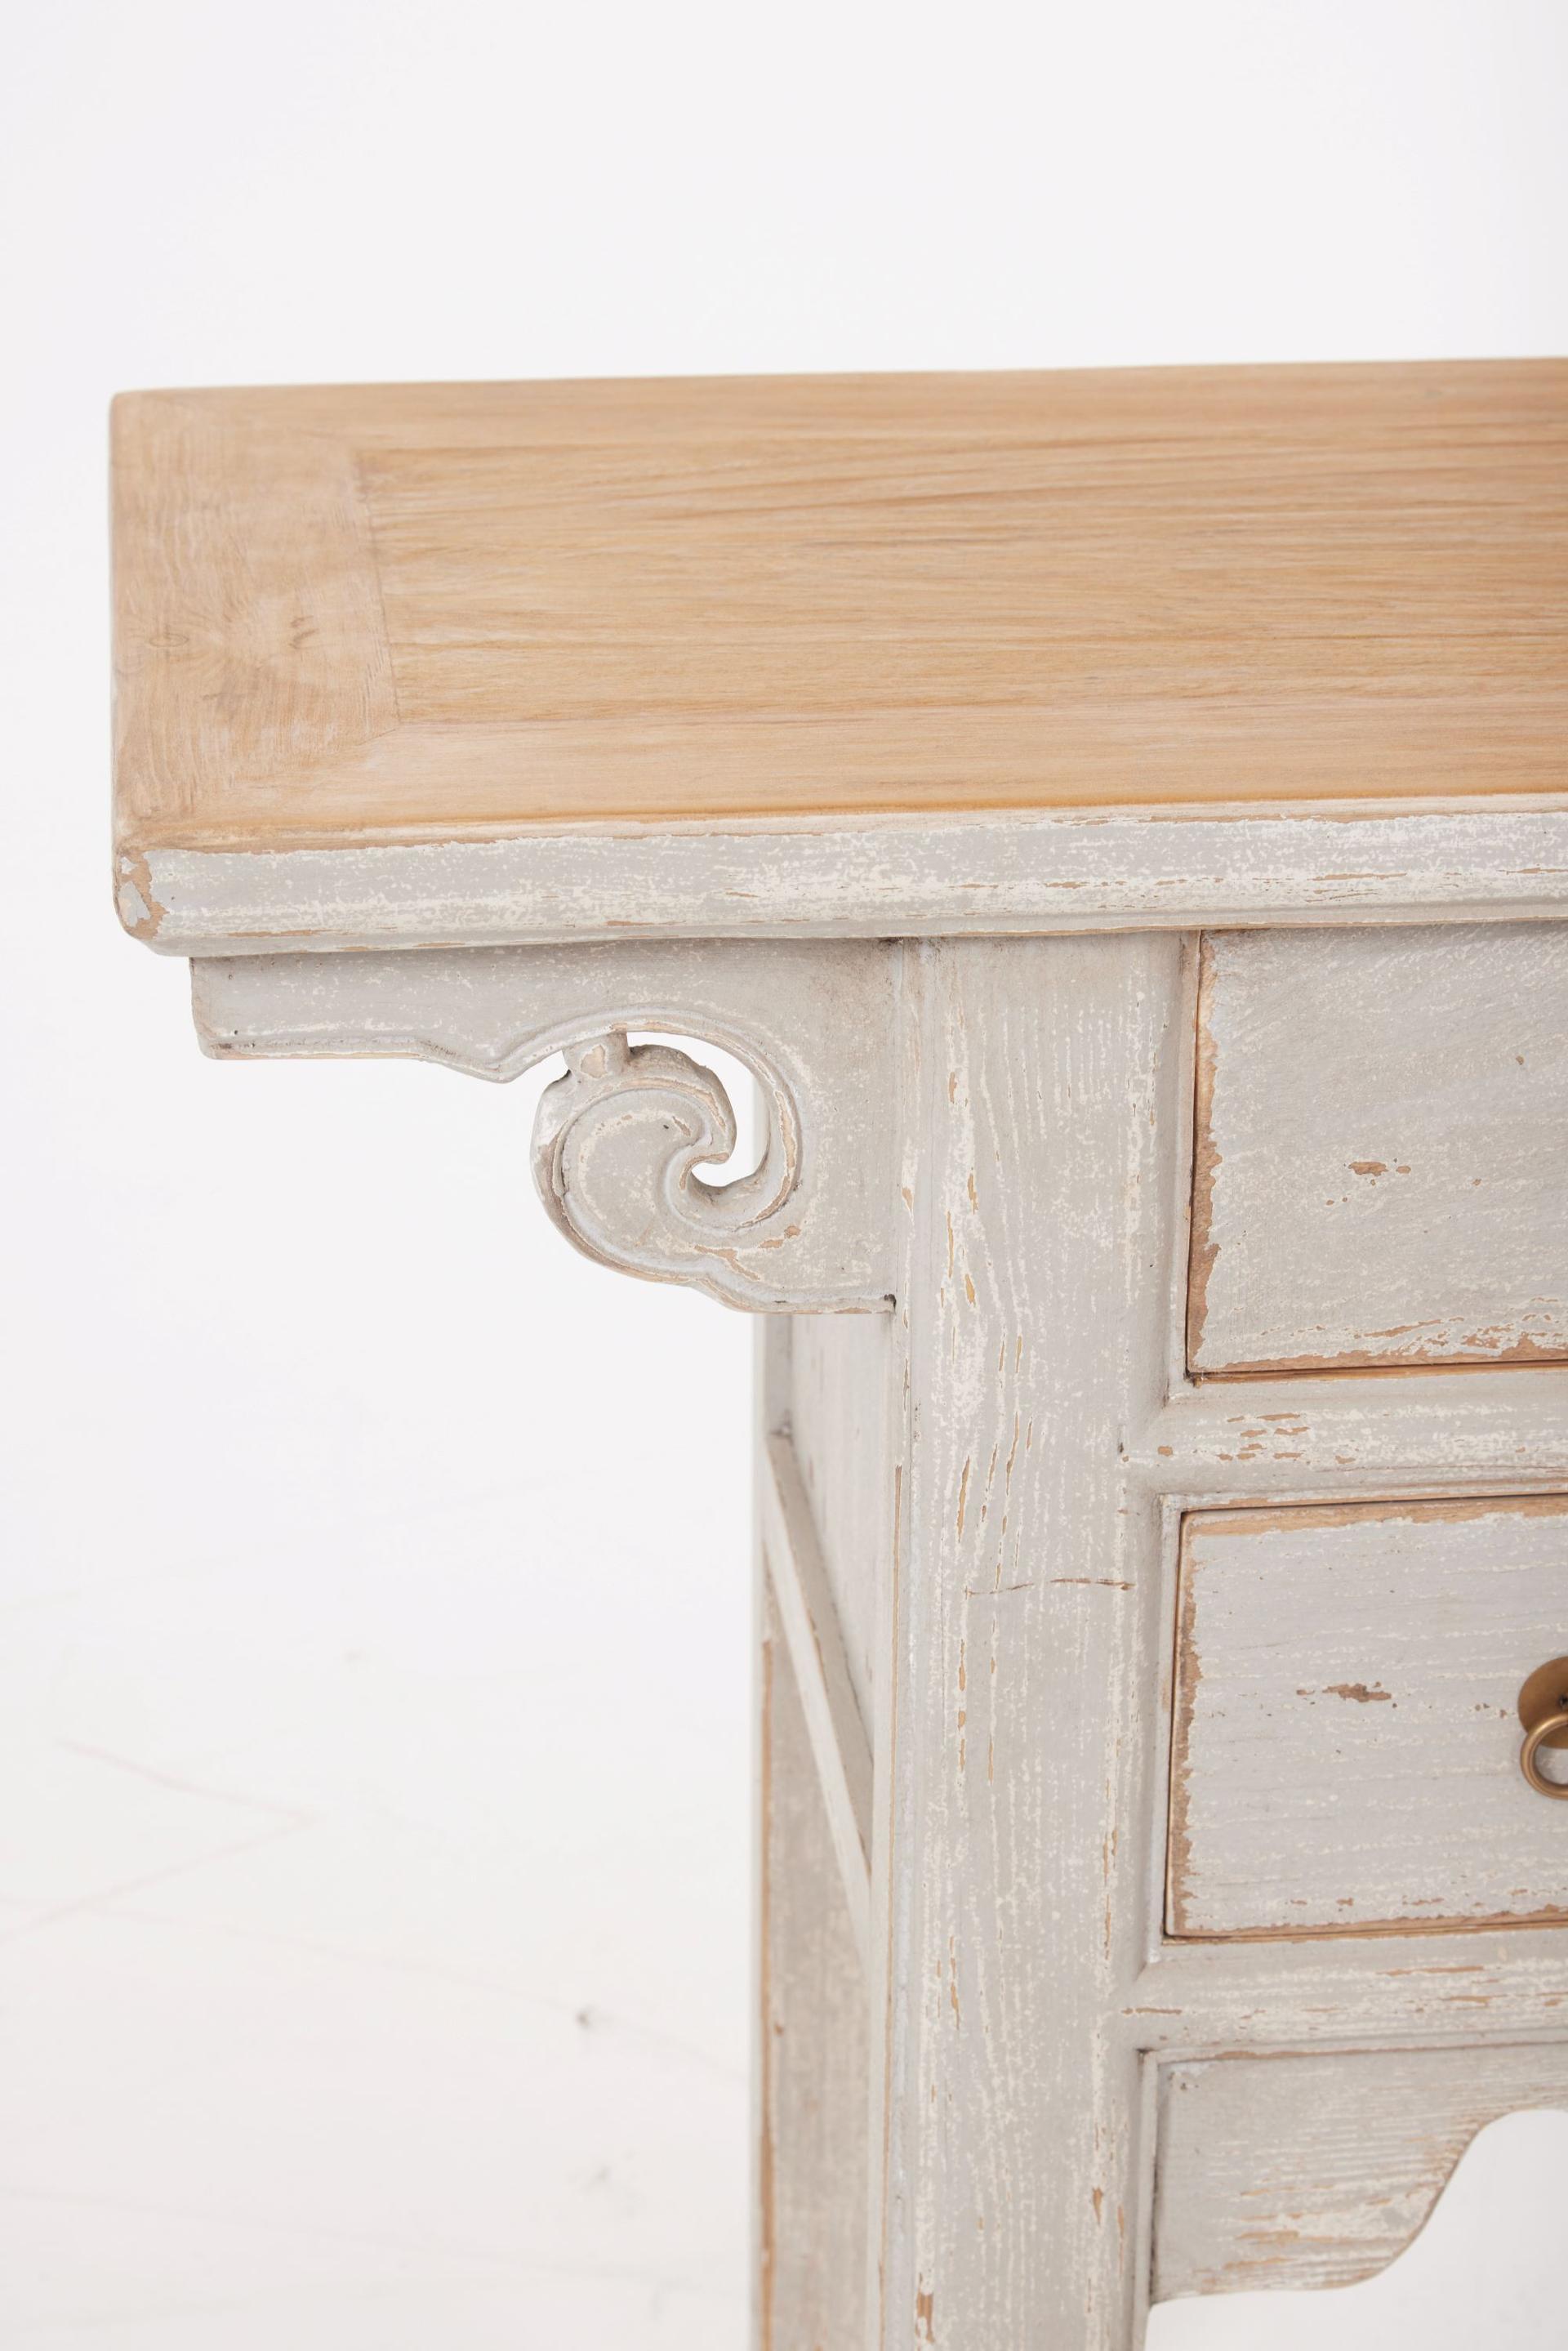 Andorra 7 Drawer Table